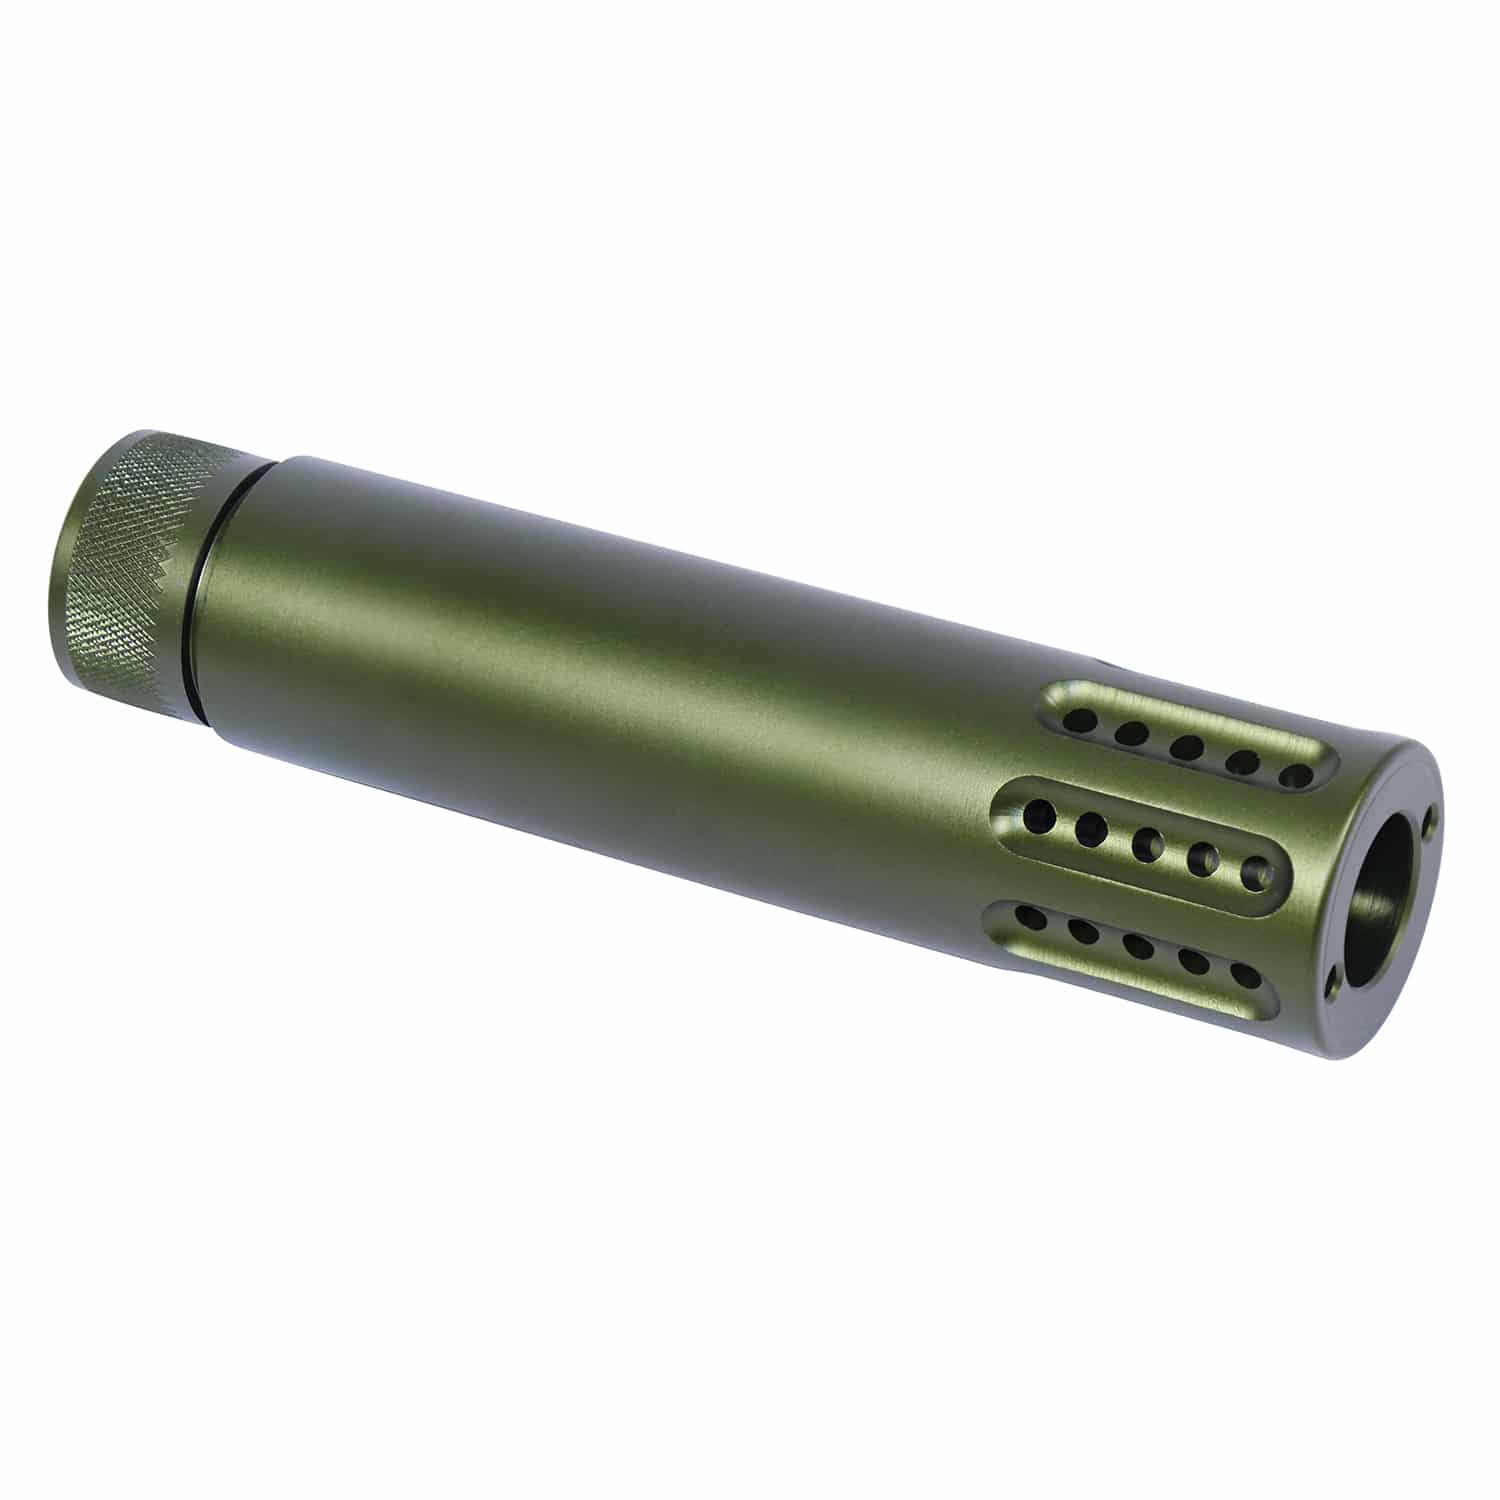 AR .308 Slip Over Fake Suppressor with Ported Muzzle Brake in Anodized Green